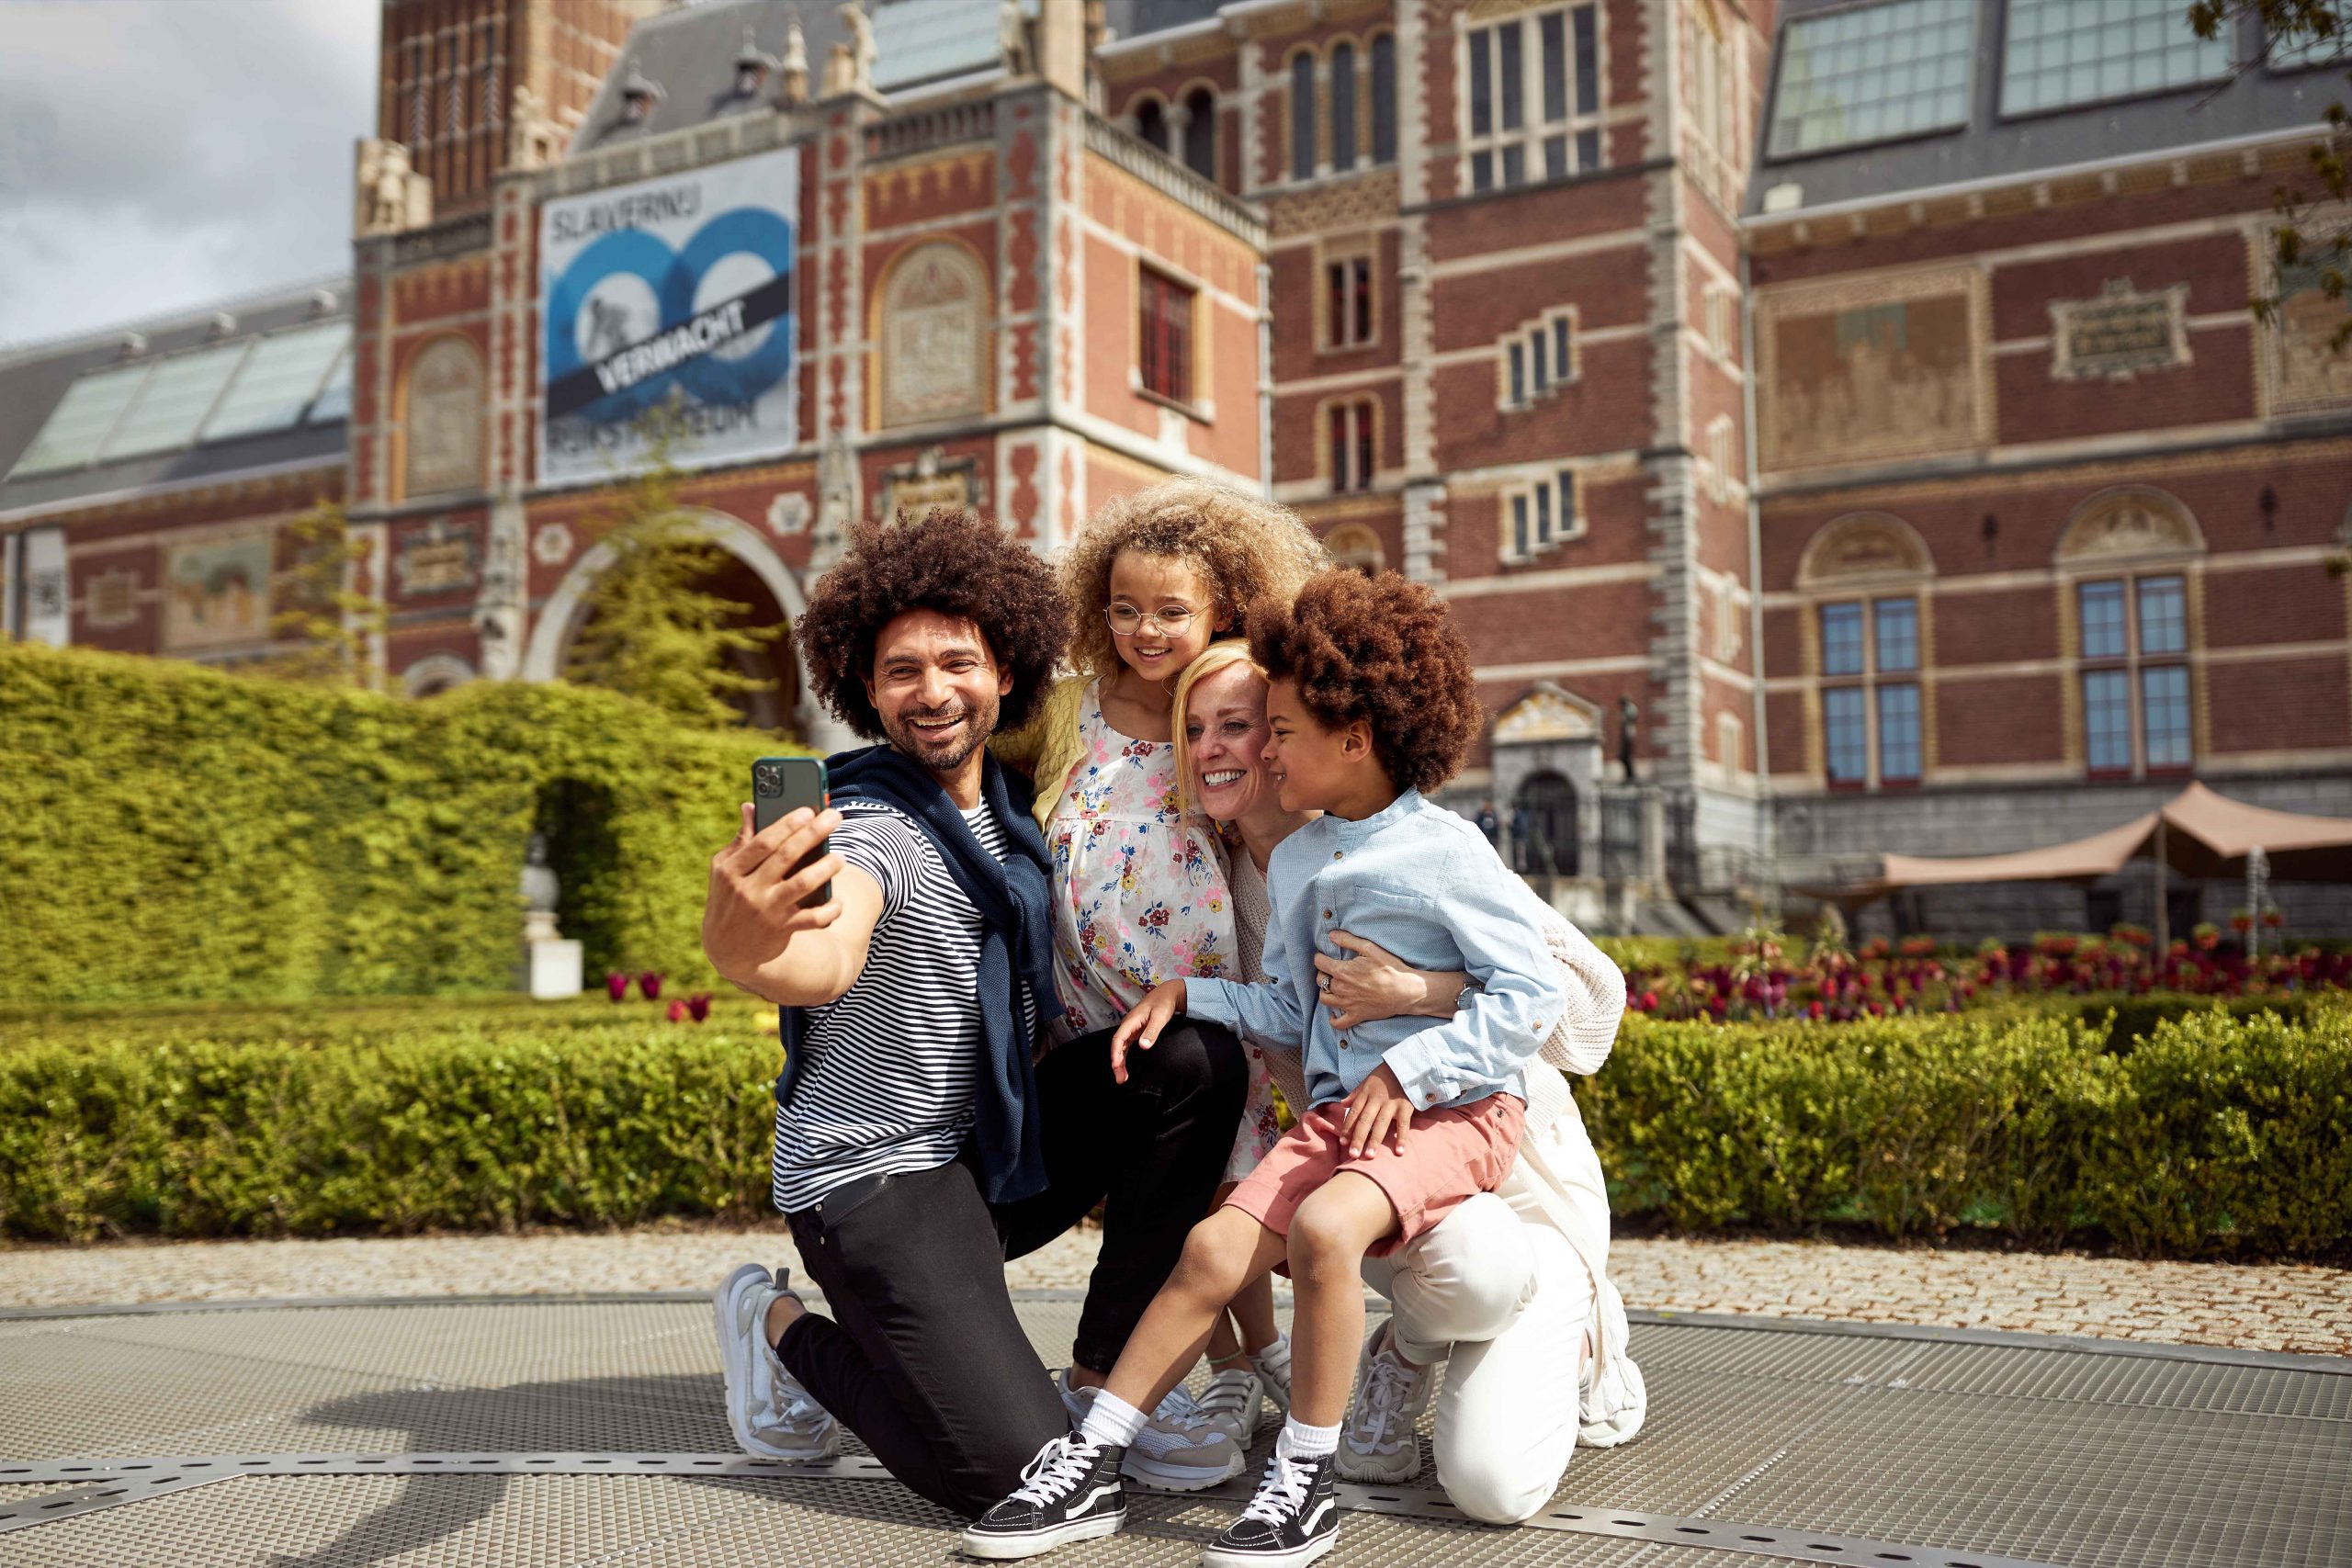 Explore The Netherlands with your family